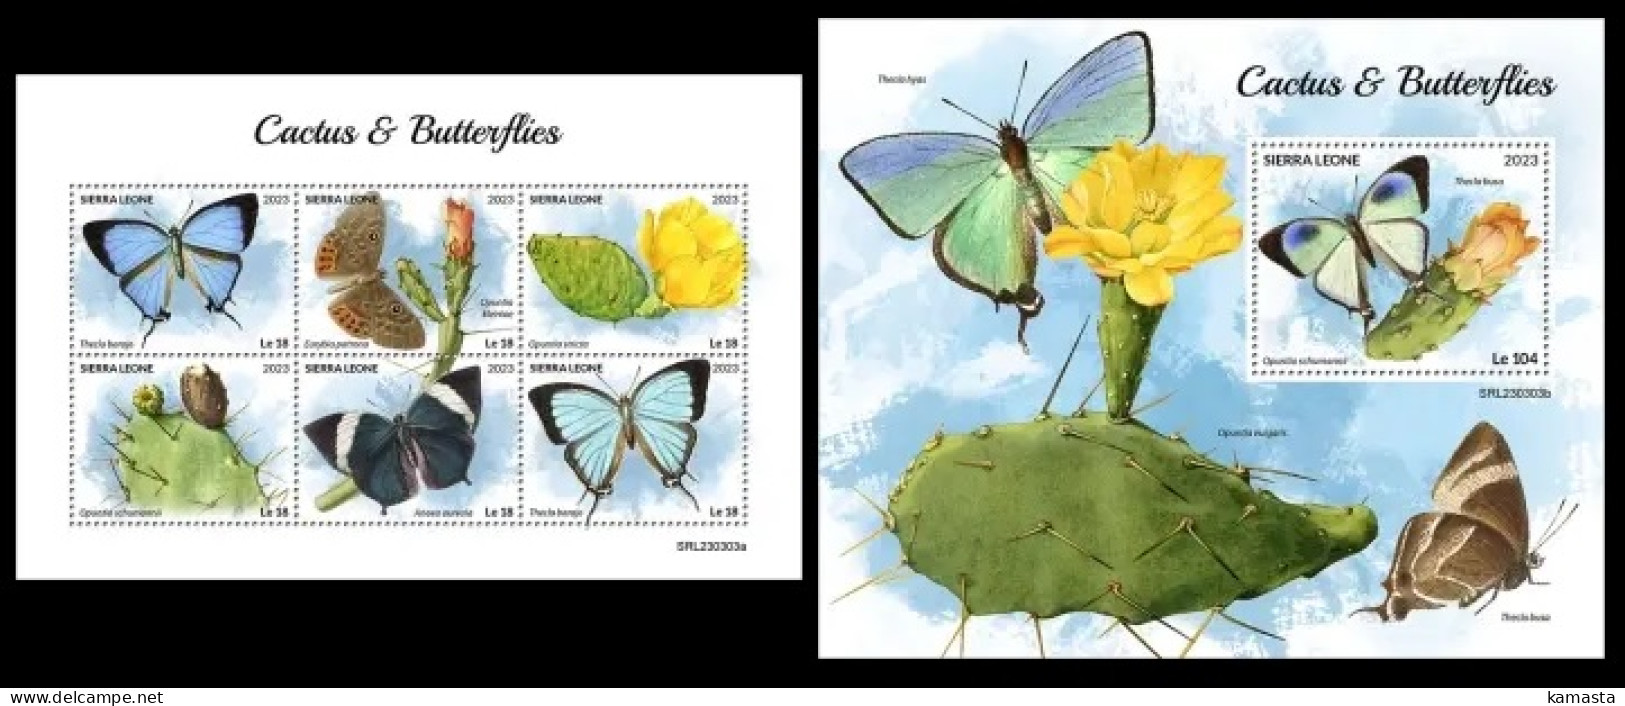 Sierra Leone  2023 Cactus & Butterflies. (303) OFFICIAL ISSUE - Papillons